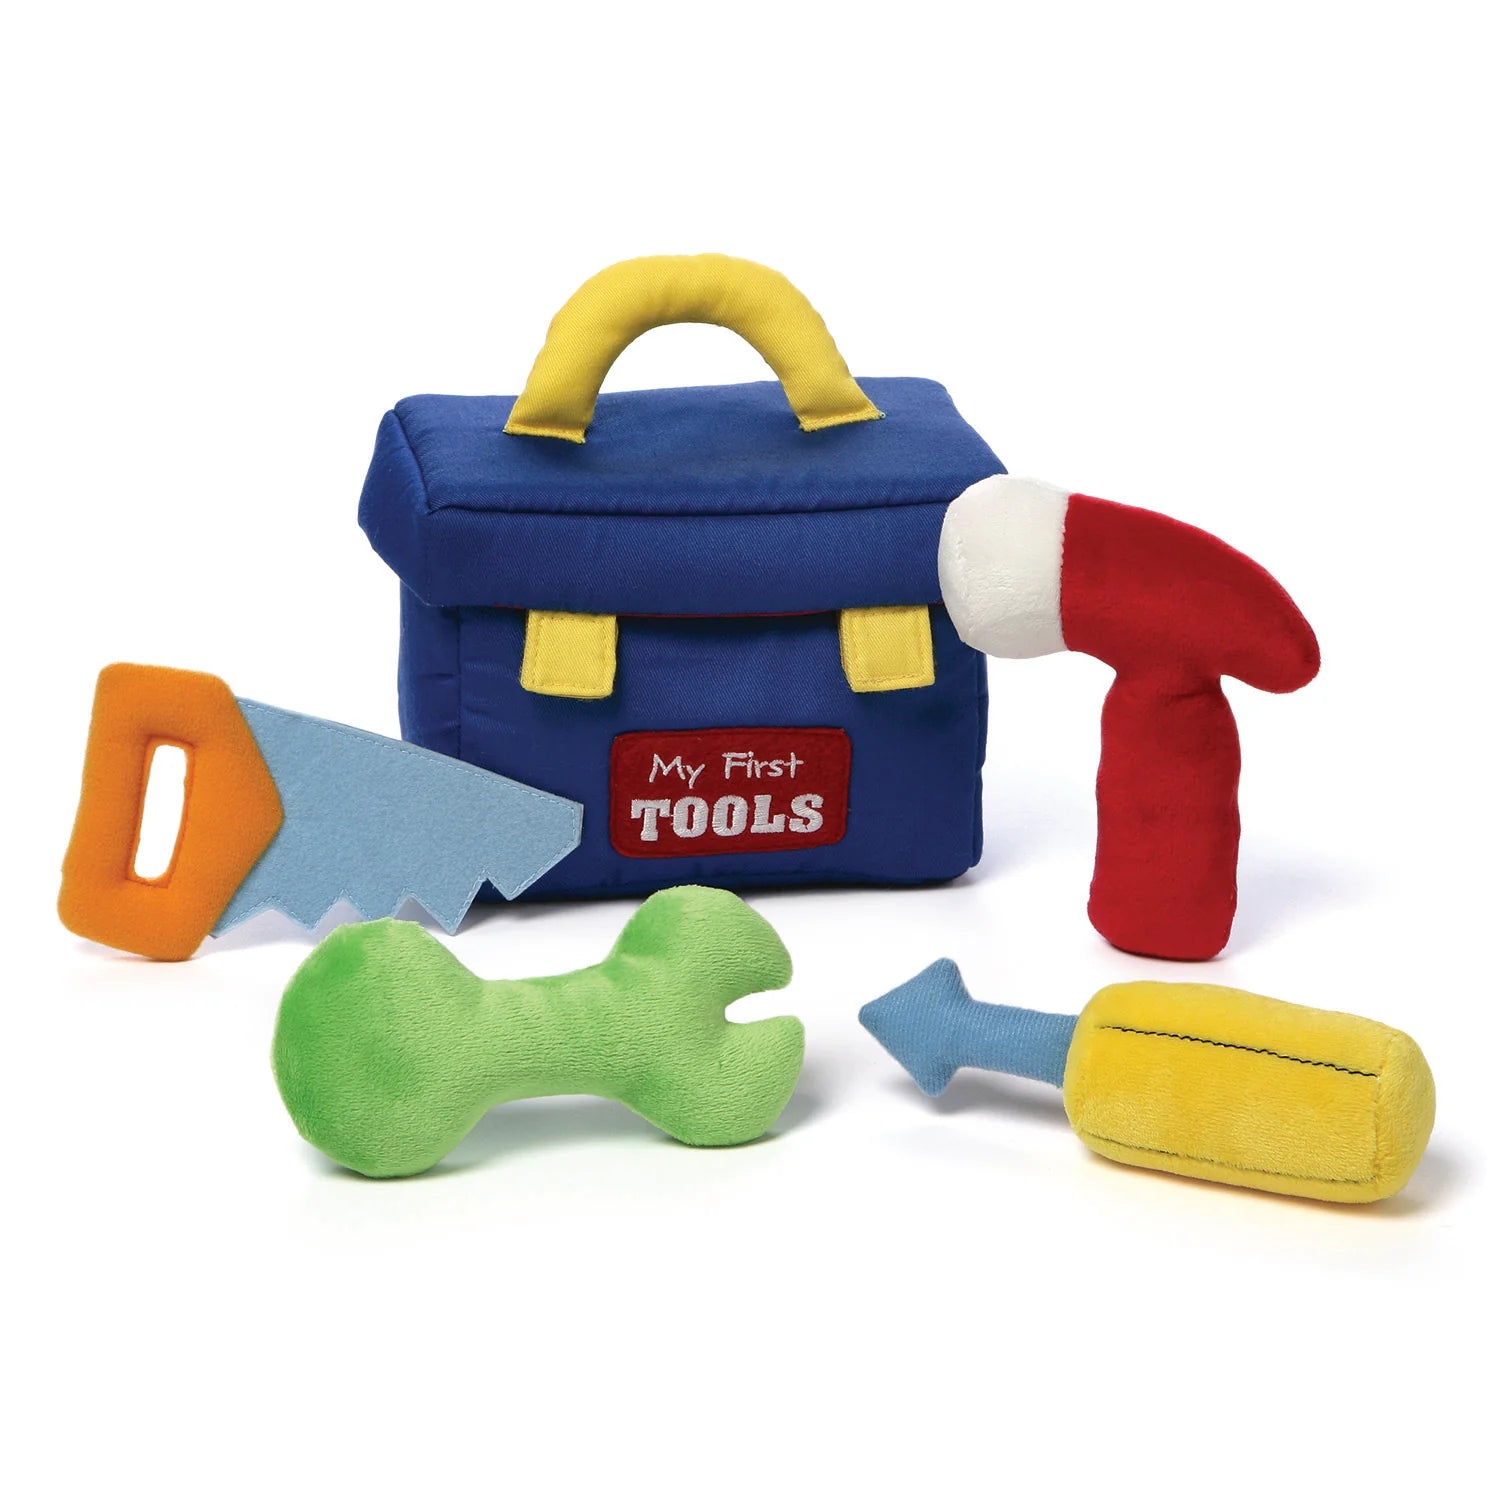 My First Tools Playset